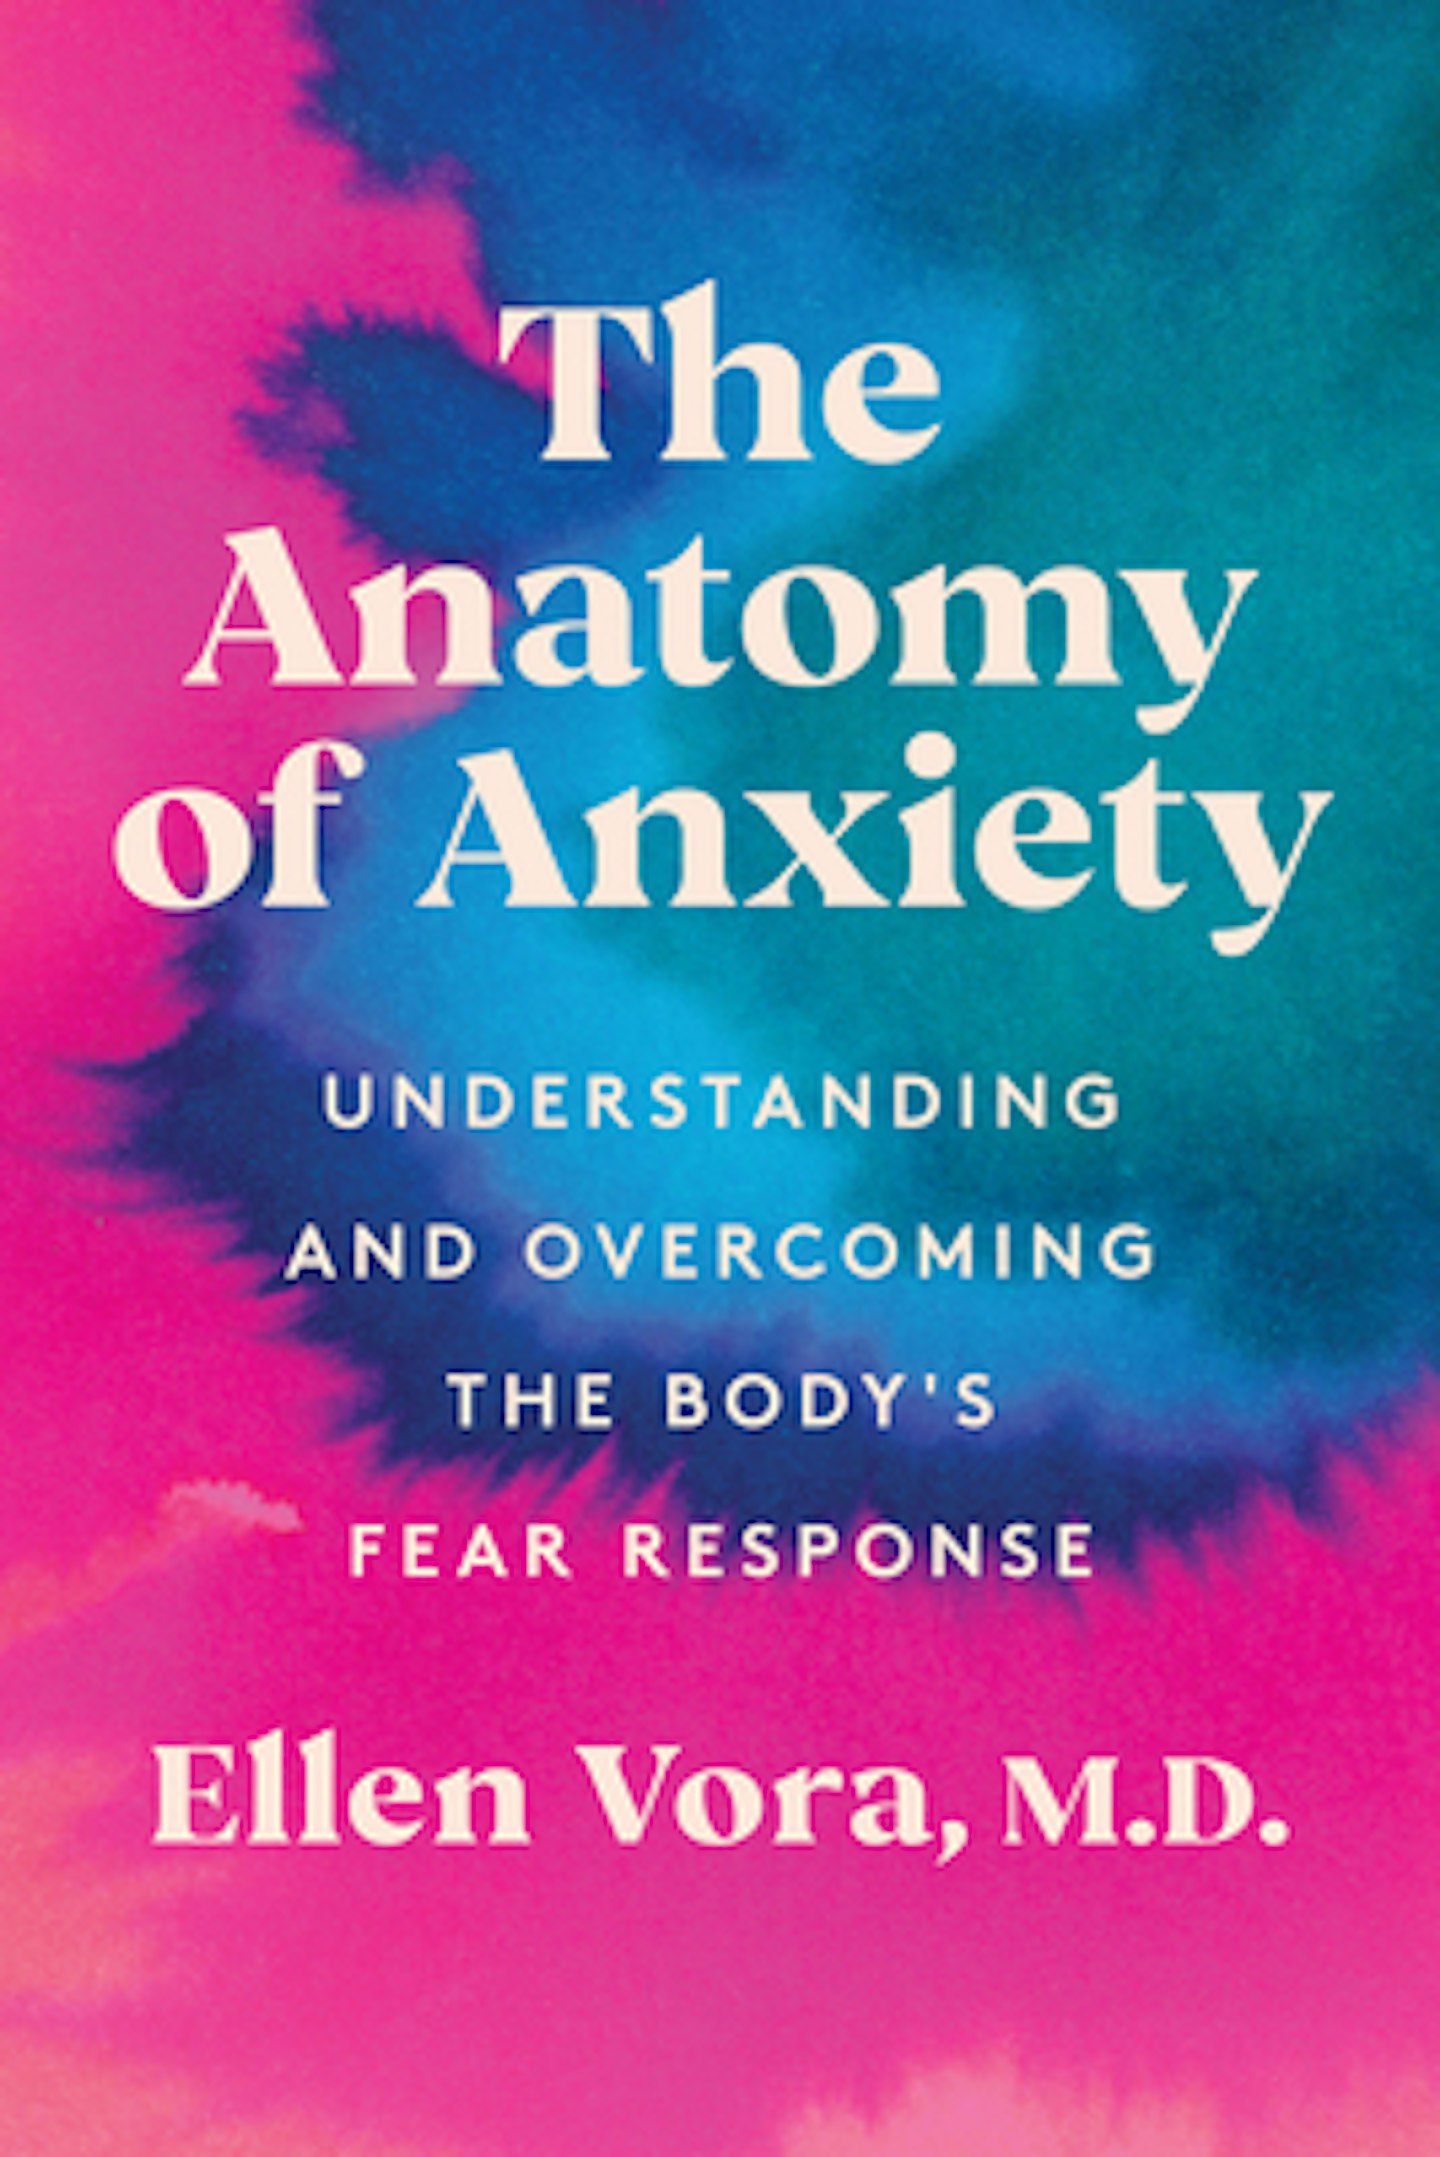 The Anatomy Of Anxiety: Understanding And Overcoming The Body's Fear Response by Ellen Vora